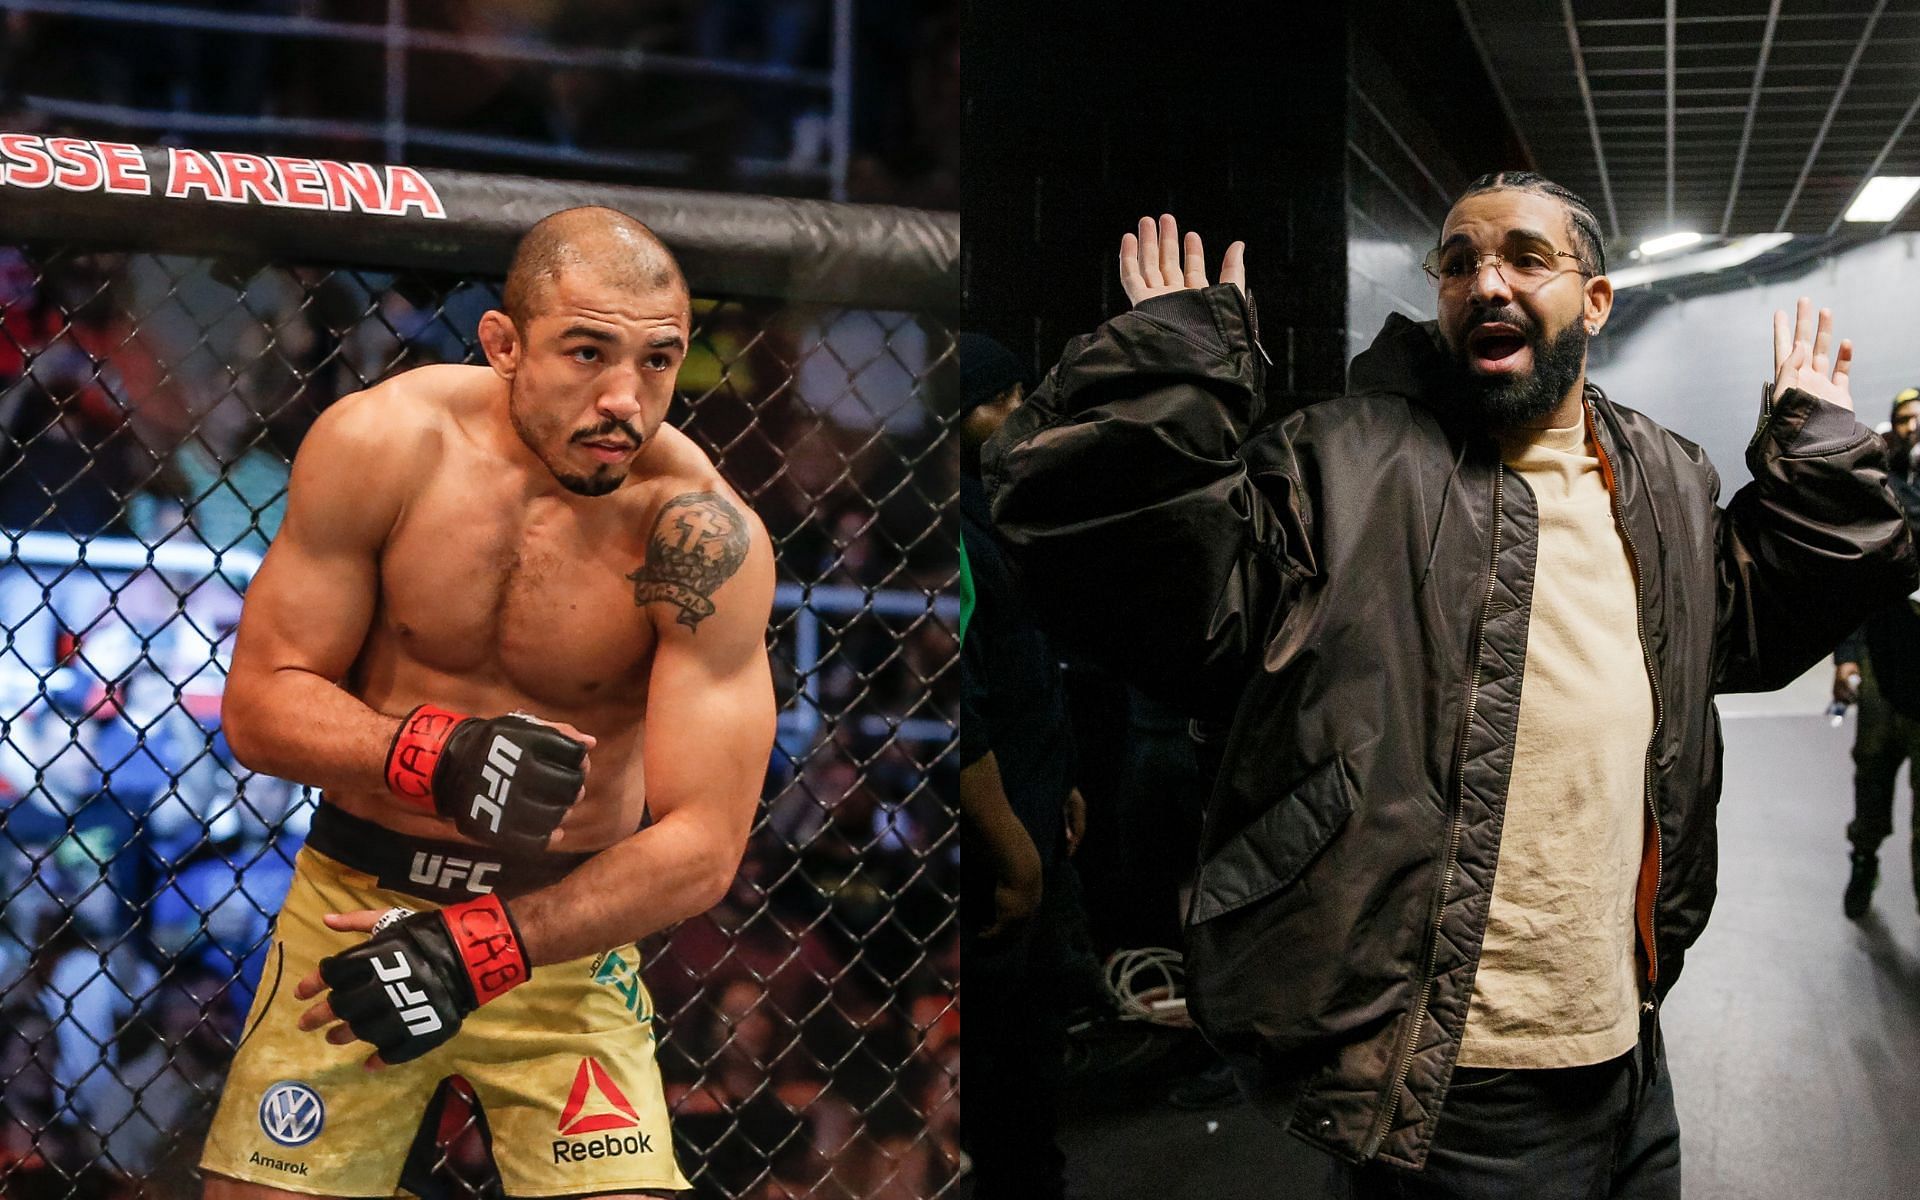 Jose Aldo (left) and Drake (right) [Images courtesy of Getty]